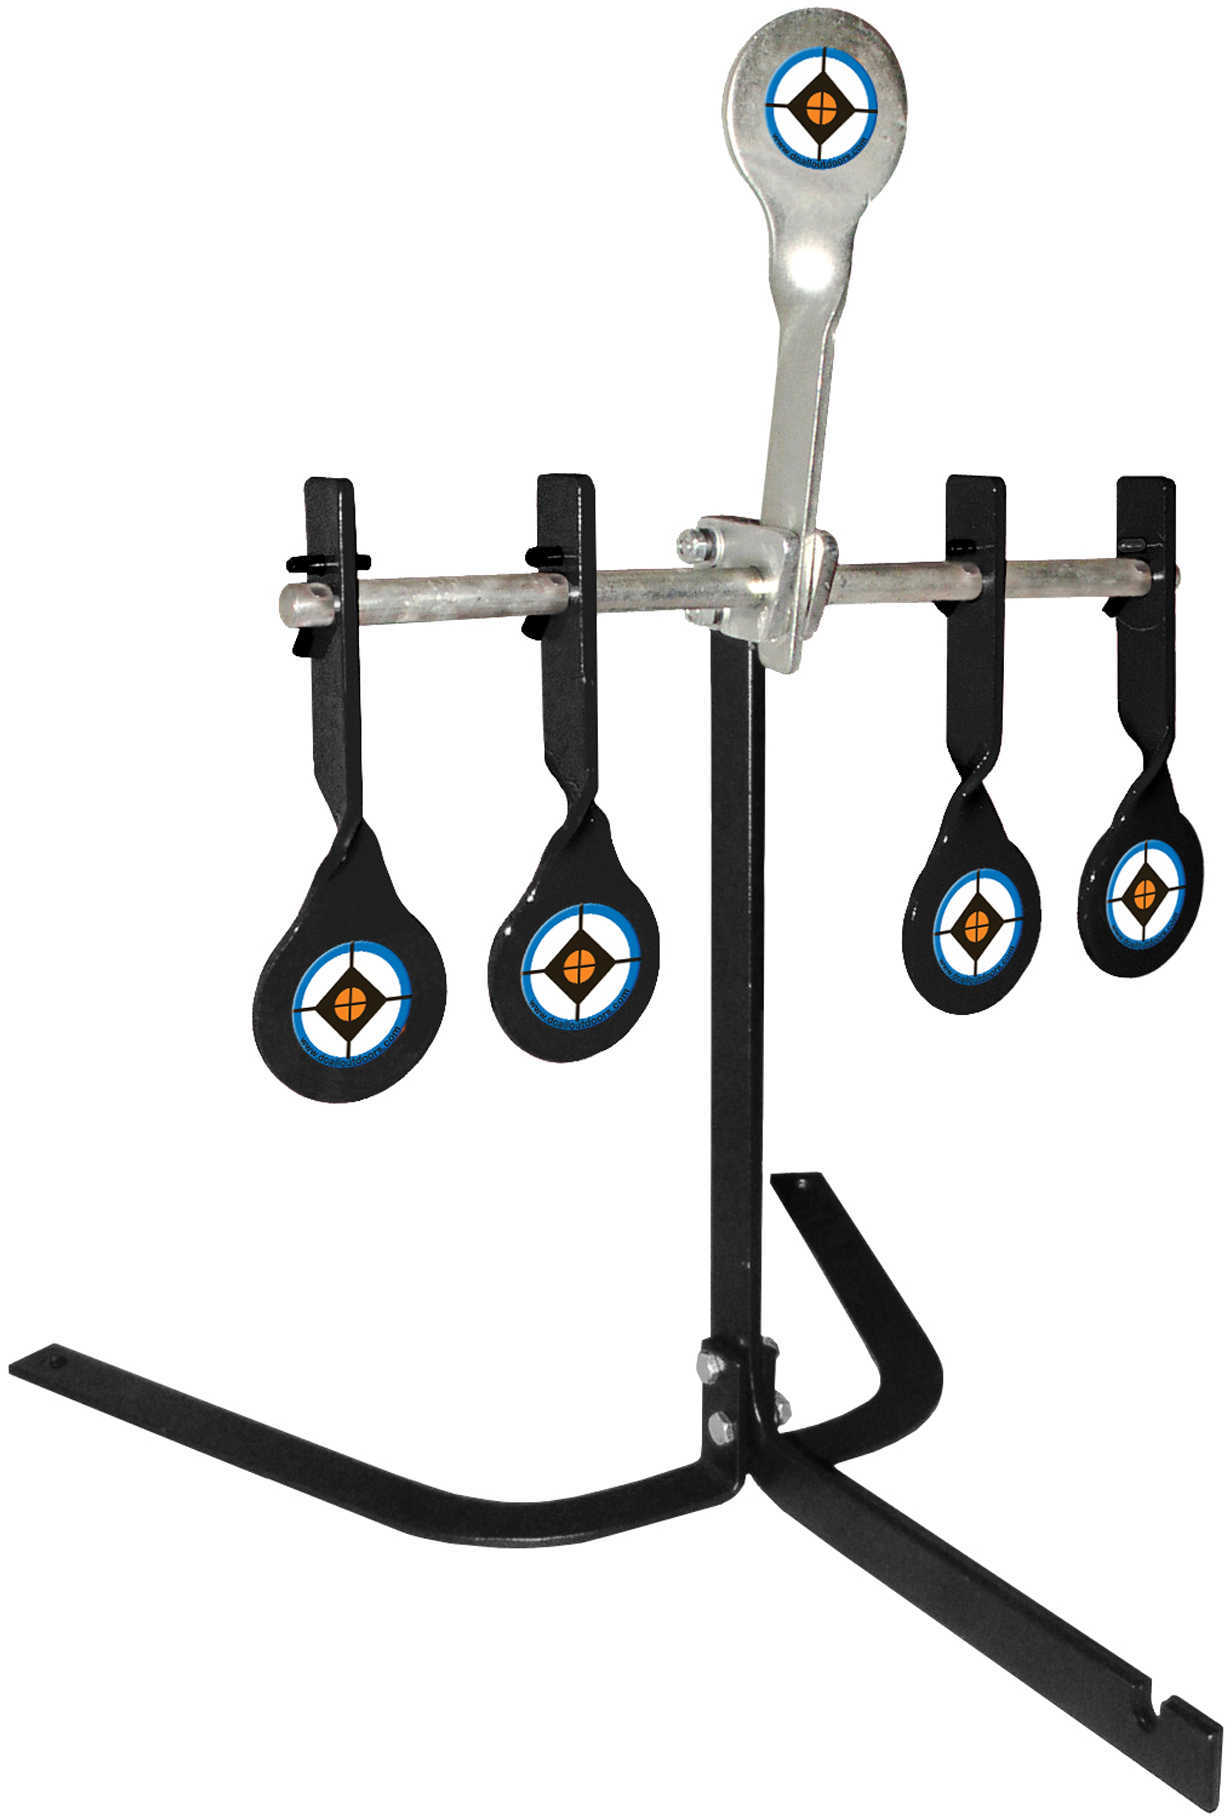 Do-All Traps .22 Rimfire Auto Reset Metal Target Pro-Style